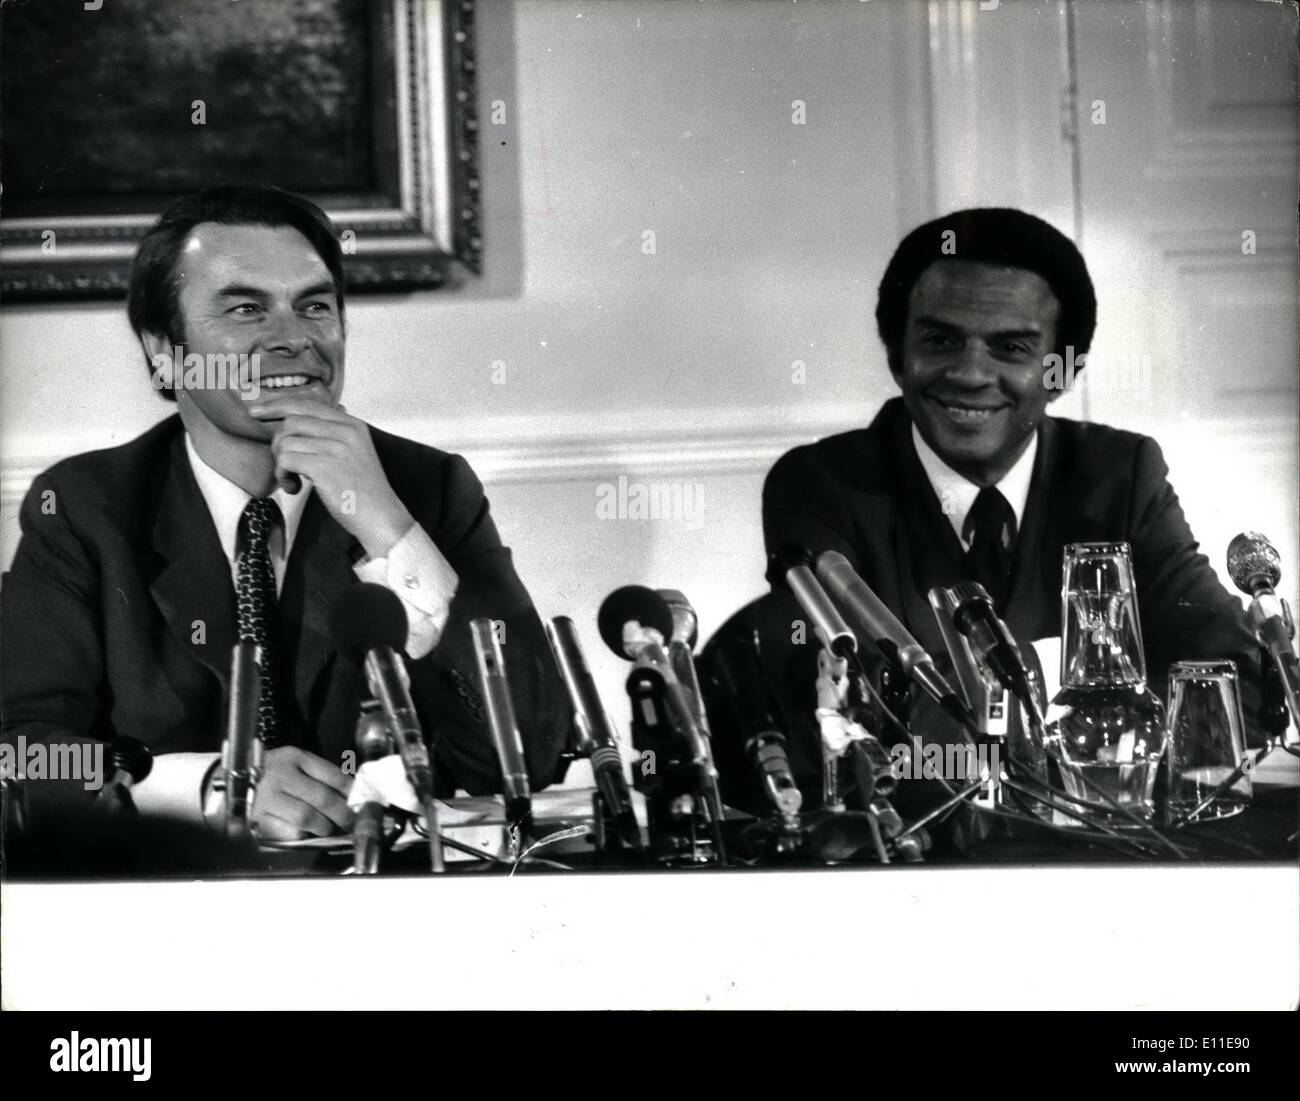 Sep. 09, 1977 - Dr. David Owen and Andrew Young give press conference on Anglo-American proposals for Rhodesia: A press conference was held today at the foreign Office by British Foreign Secretary Mr David Owen and U.S. Ambassador to the United Nations, on the Anglo-American proposals for a Rhodesian settlement, after their return from Rhodesia early today. Photo shows Foreign Secretary Dr. David Owen and U.S. Ambassador to UN Mr Andrew Young seen during the press conference at the foreign office today. Stock Photo